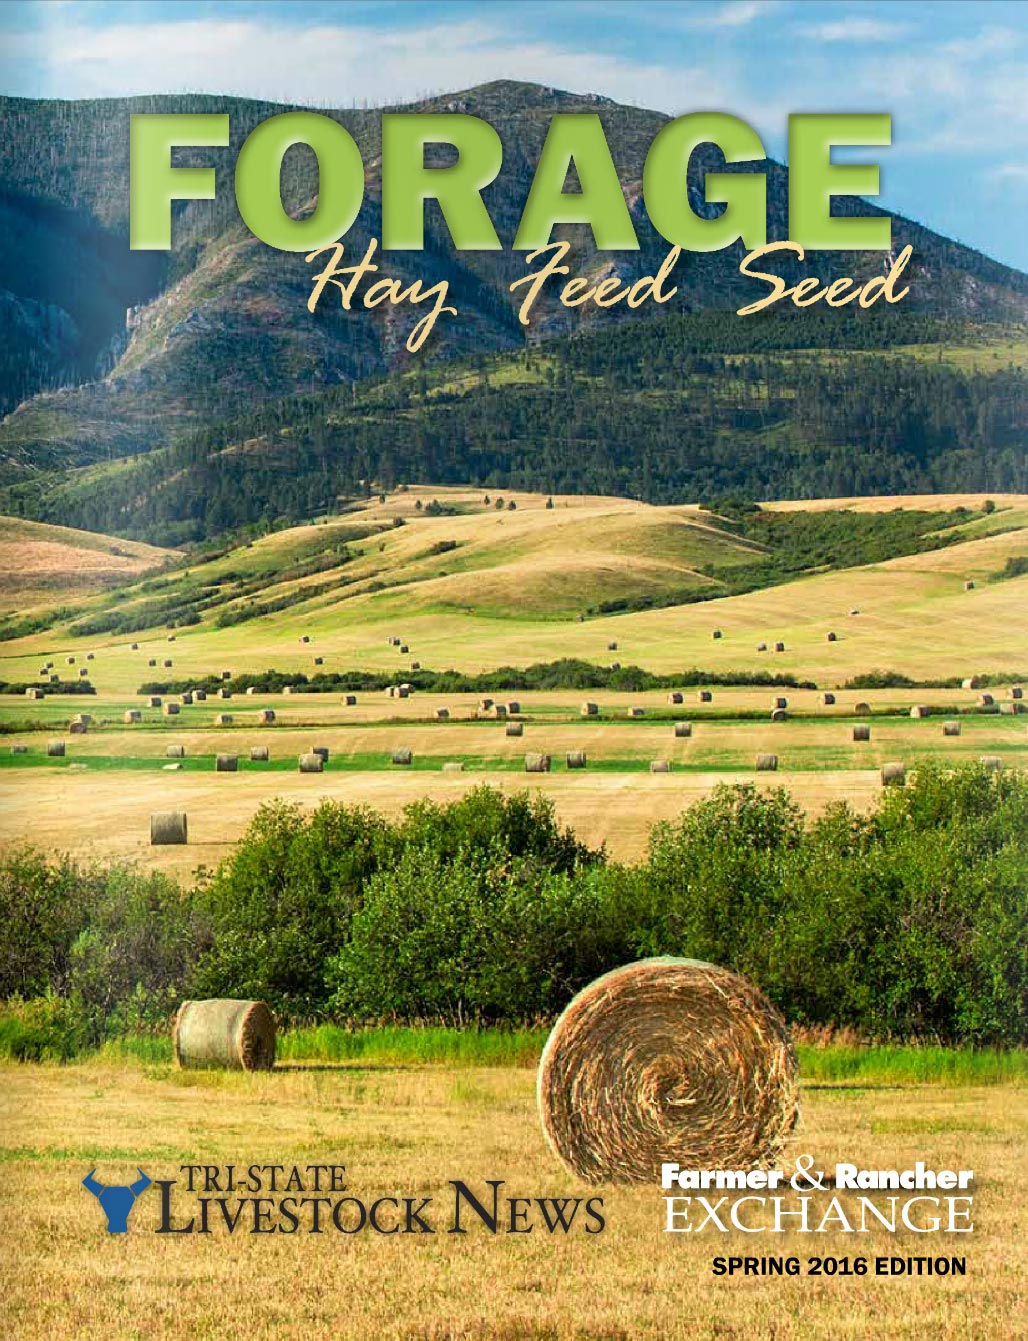 My photo of round bales near the Judith Mountains outside of Lewistown, Montana appears on the cover of the latest issue of Forage Magazine as seen here.